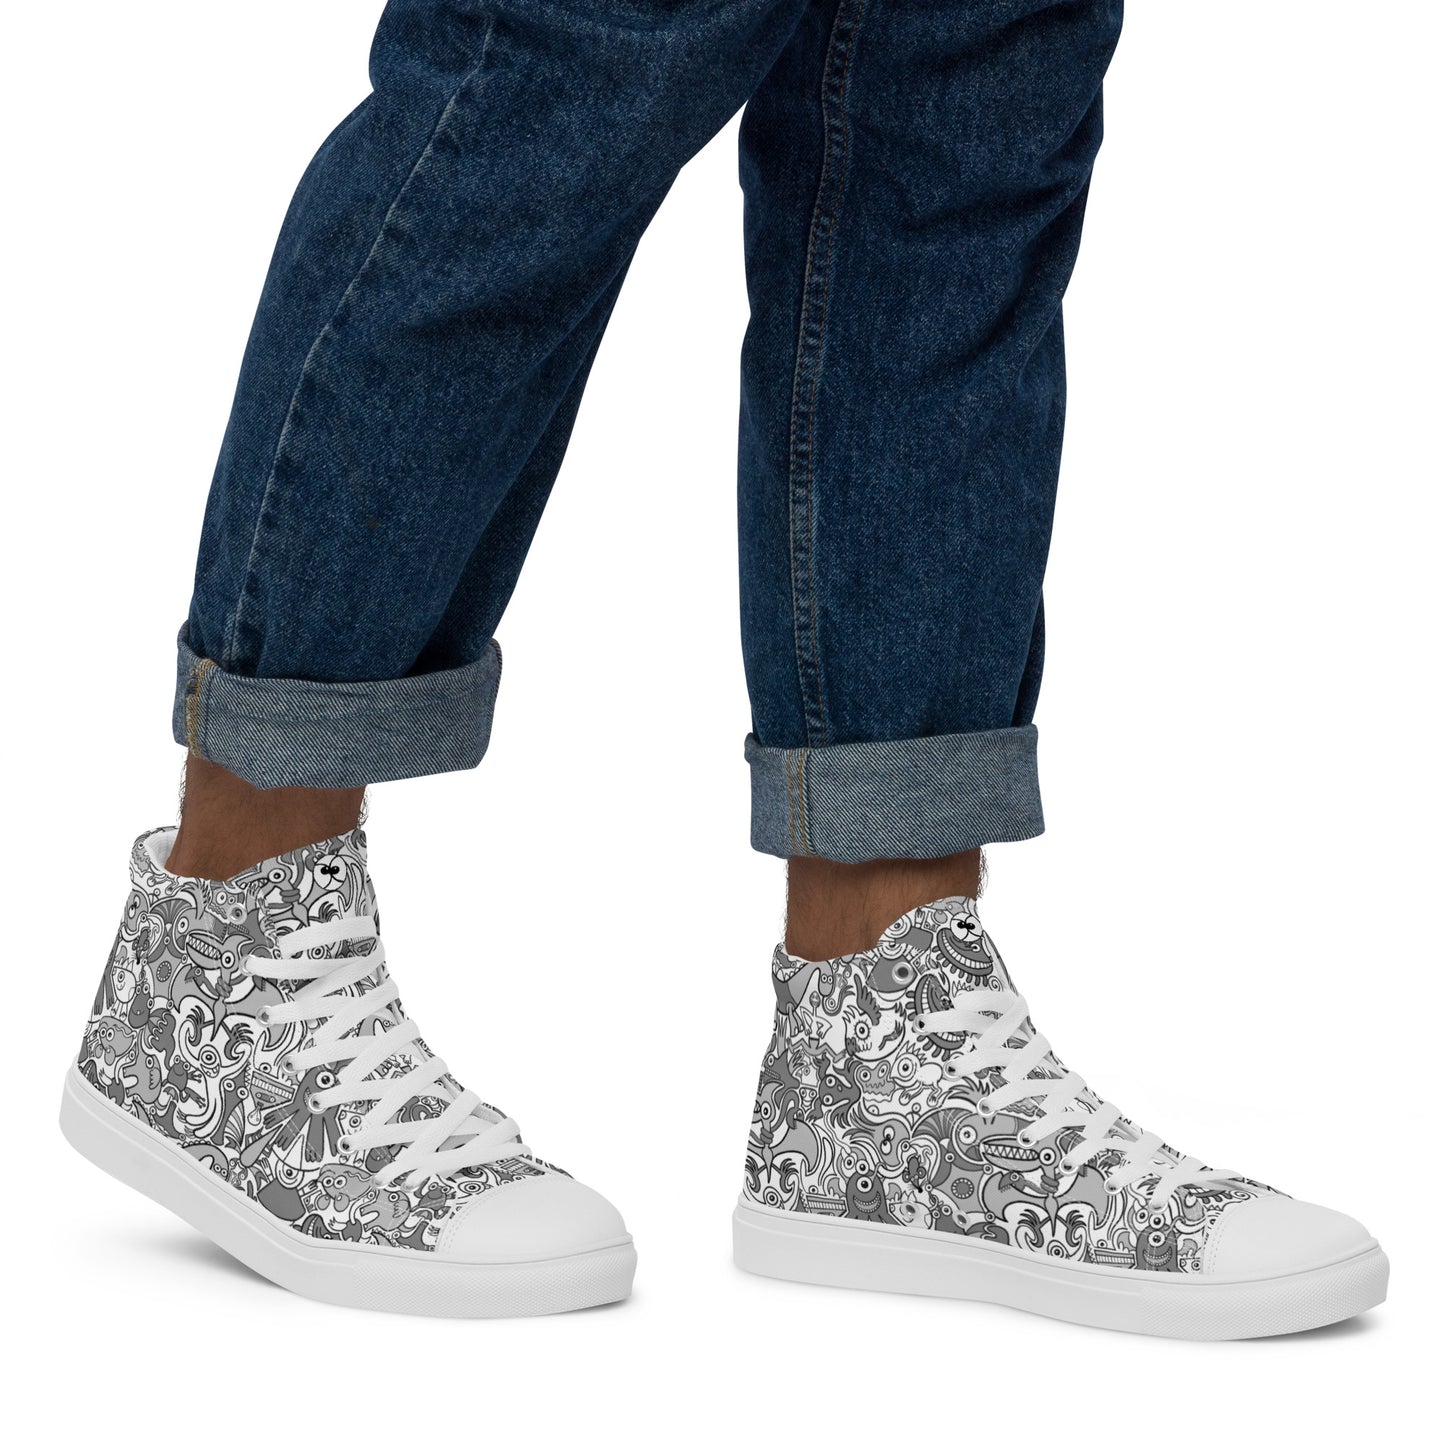 Awesome doodle creatures in a variety of tones of gray Men’s high top canvas shoes. Lifestyle